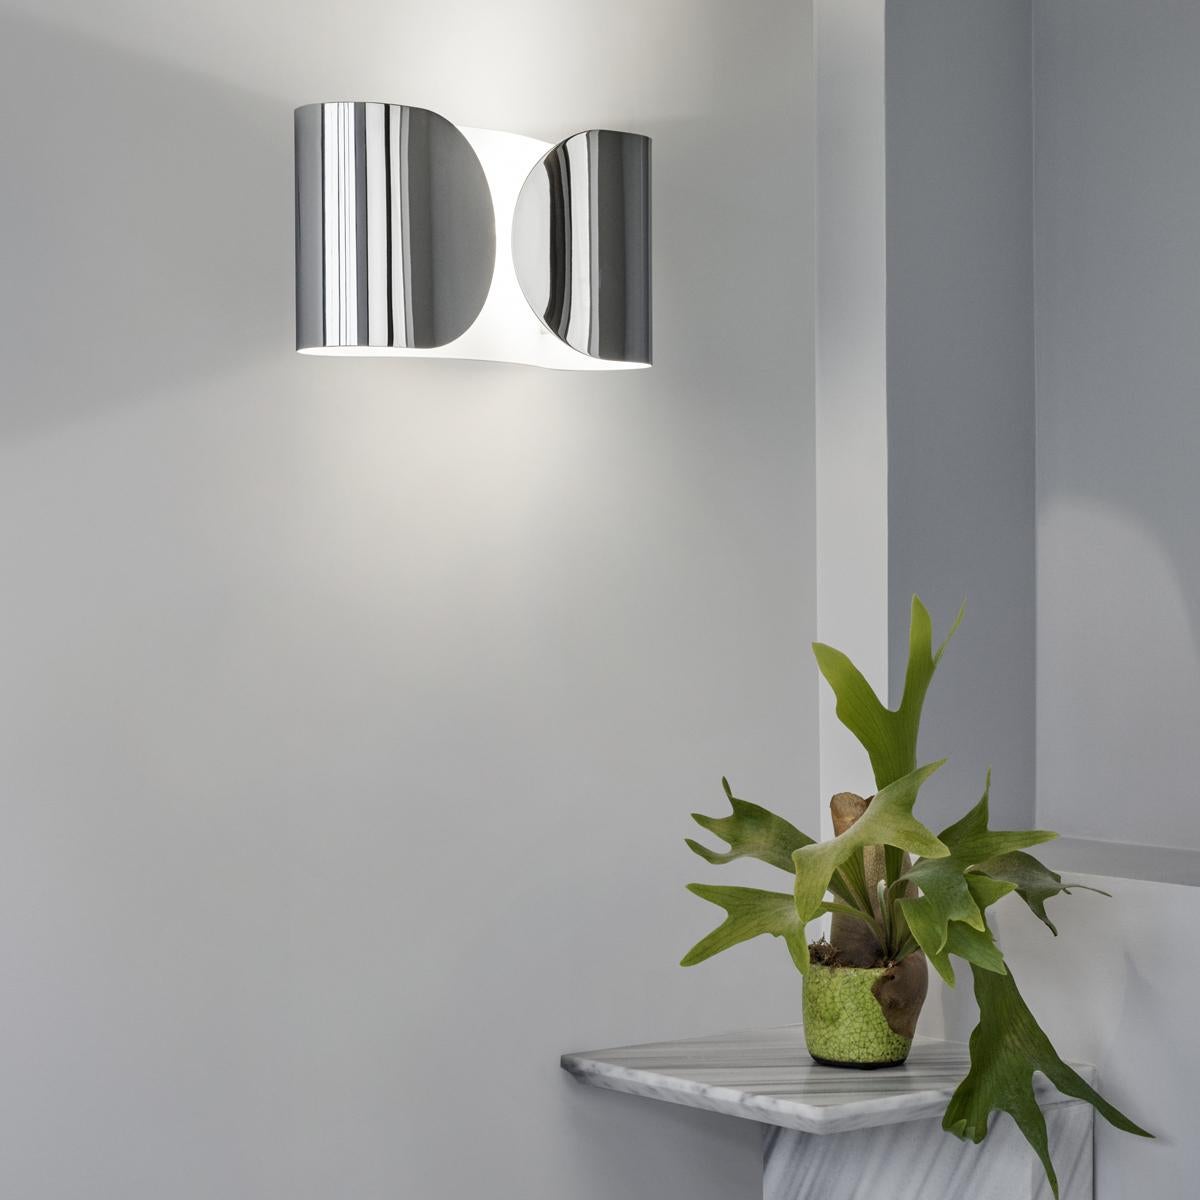 Flos Foglio - Wall Sconce in Black Nickel by Tobia Scarpa In Excellent Condition For Sale In Brooklyn, NY